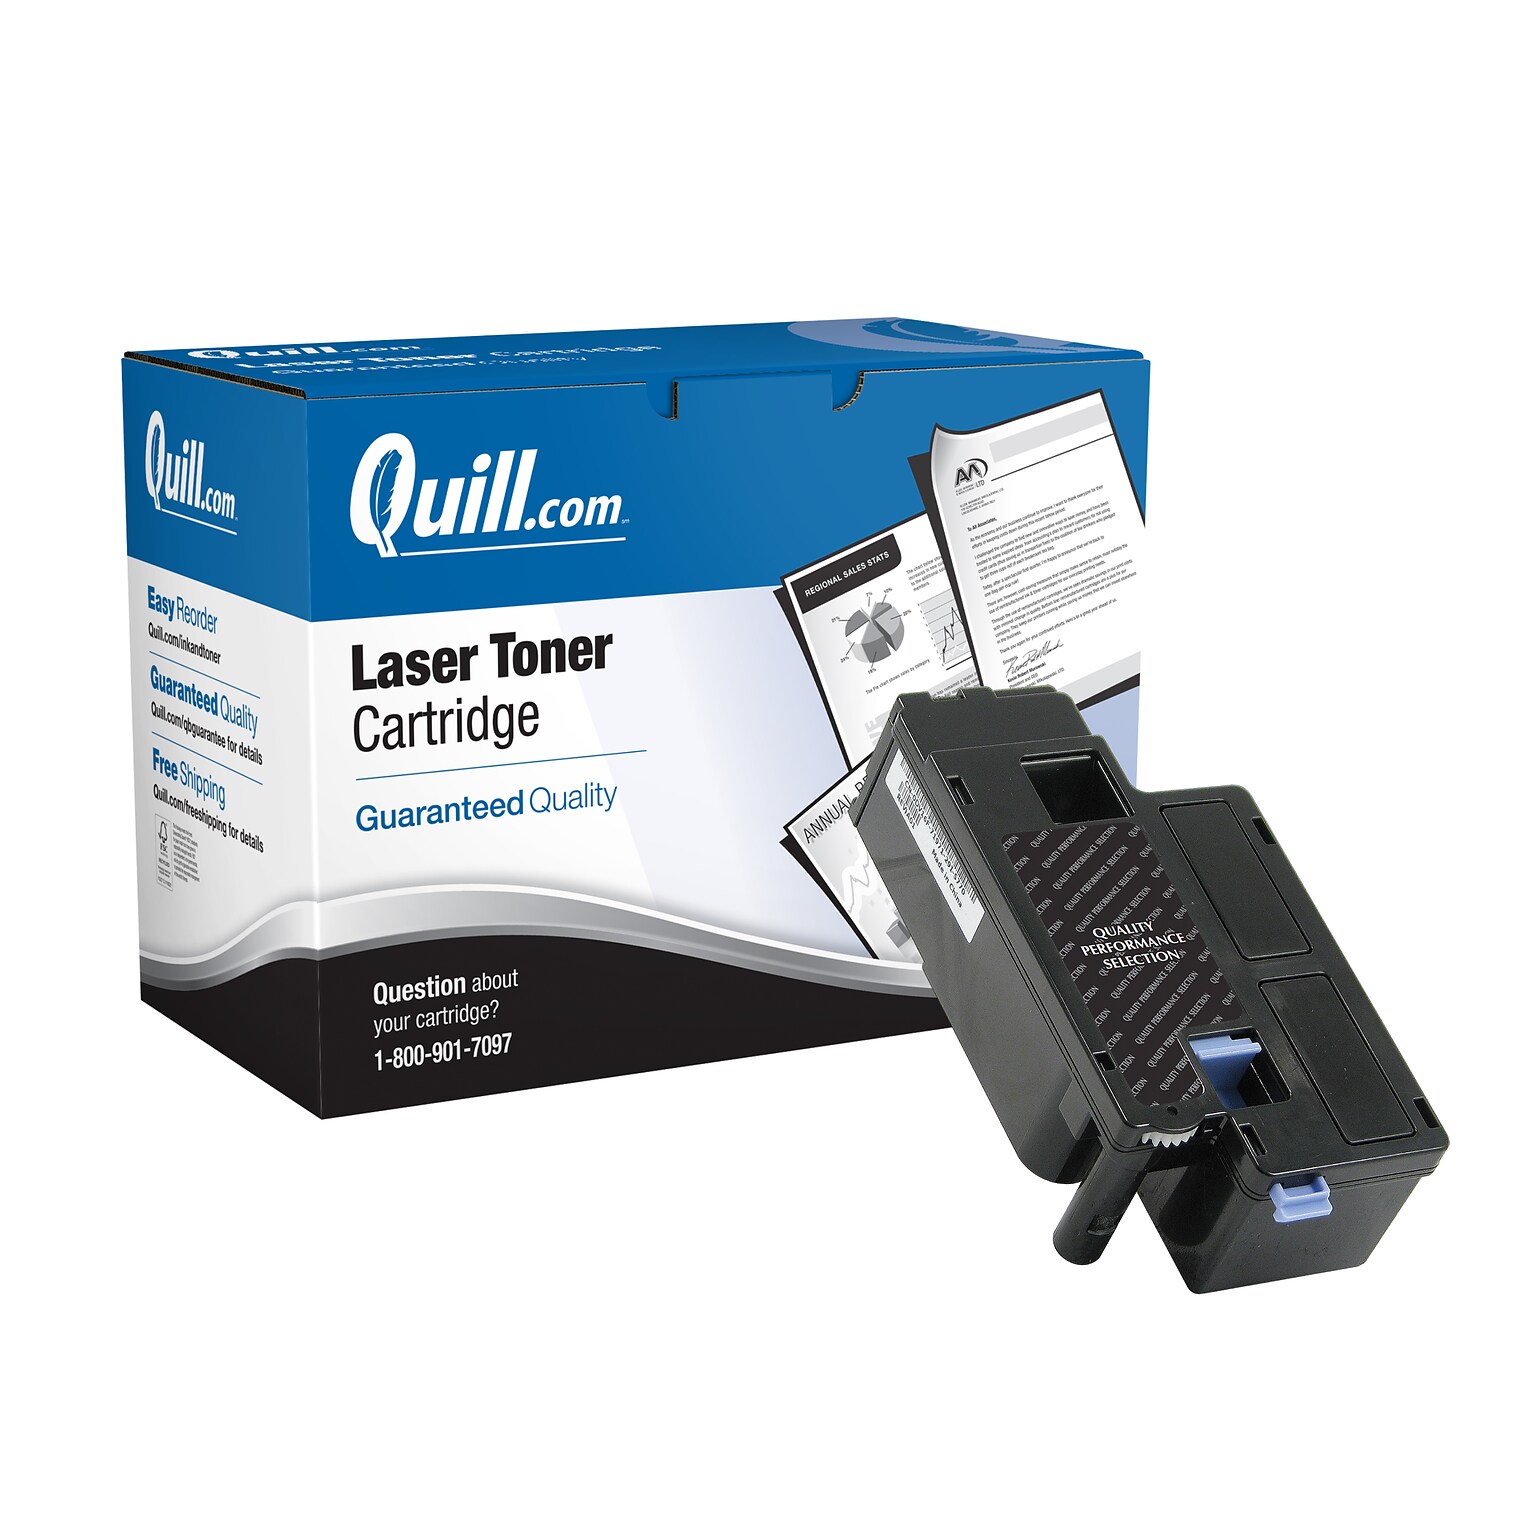 Quill Brand® Remanufactured Black Standard Yield Toner Cartridge Replacement for Xerox 6022/6027 (106R02759) (Lifetime Warranty)